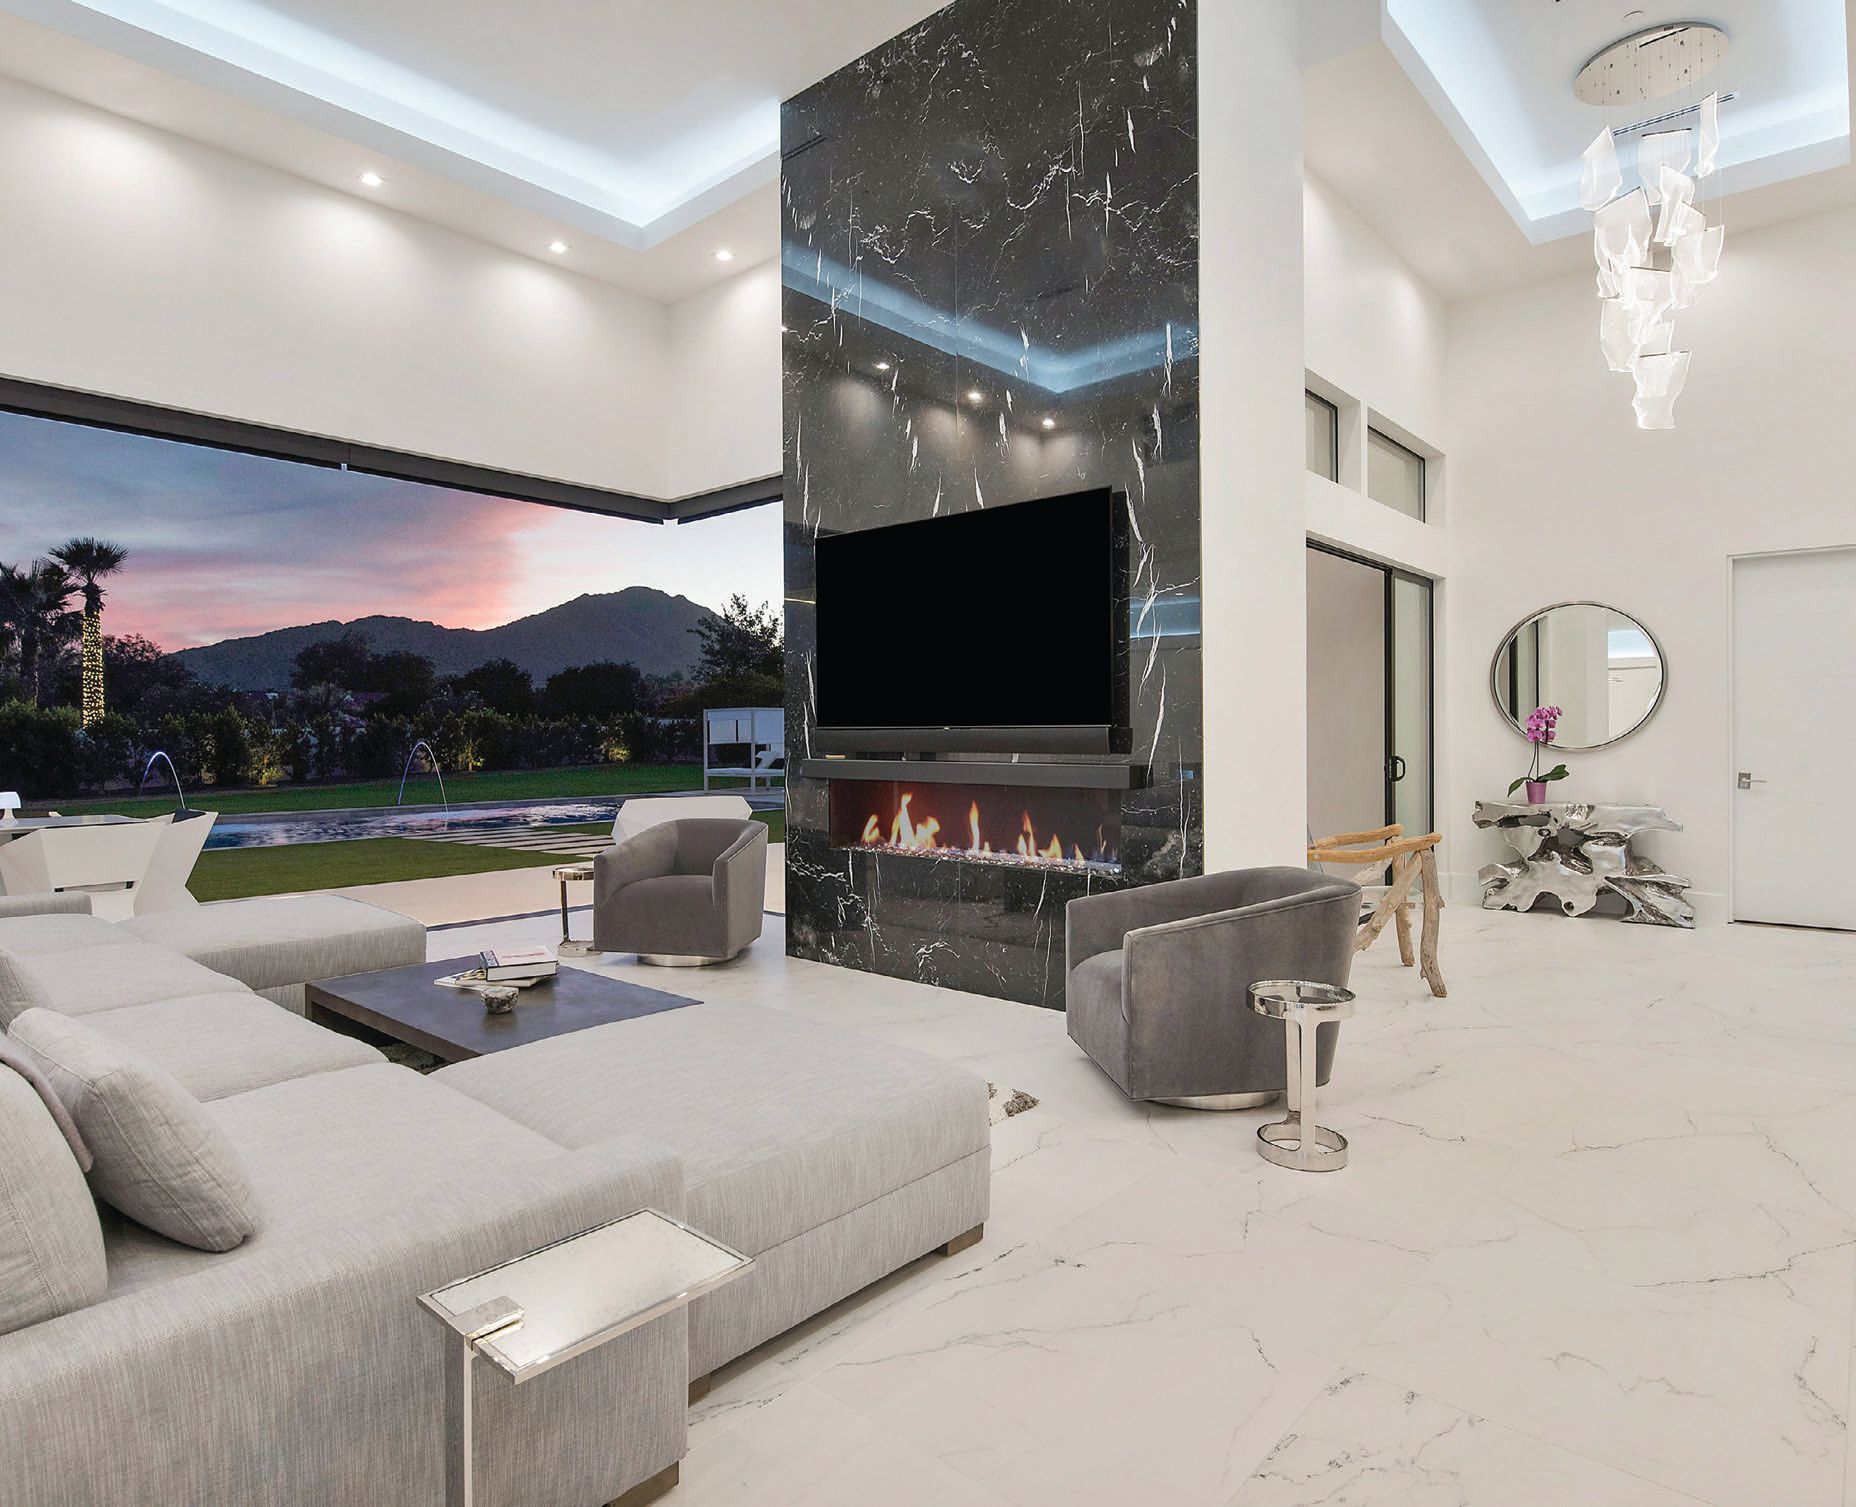 The fireplace accent wall in the living room is the star of the show, using Arizona Title’s black marble tile PHOTO COURTESY OF RMB LUXURY REAL ESTATE